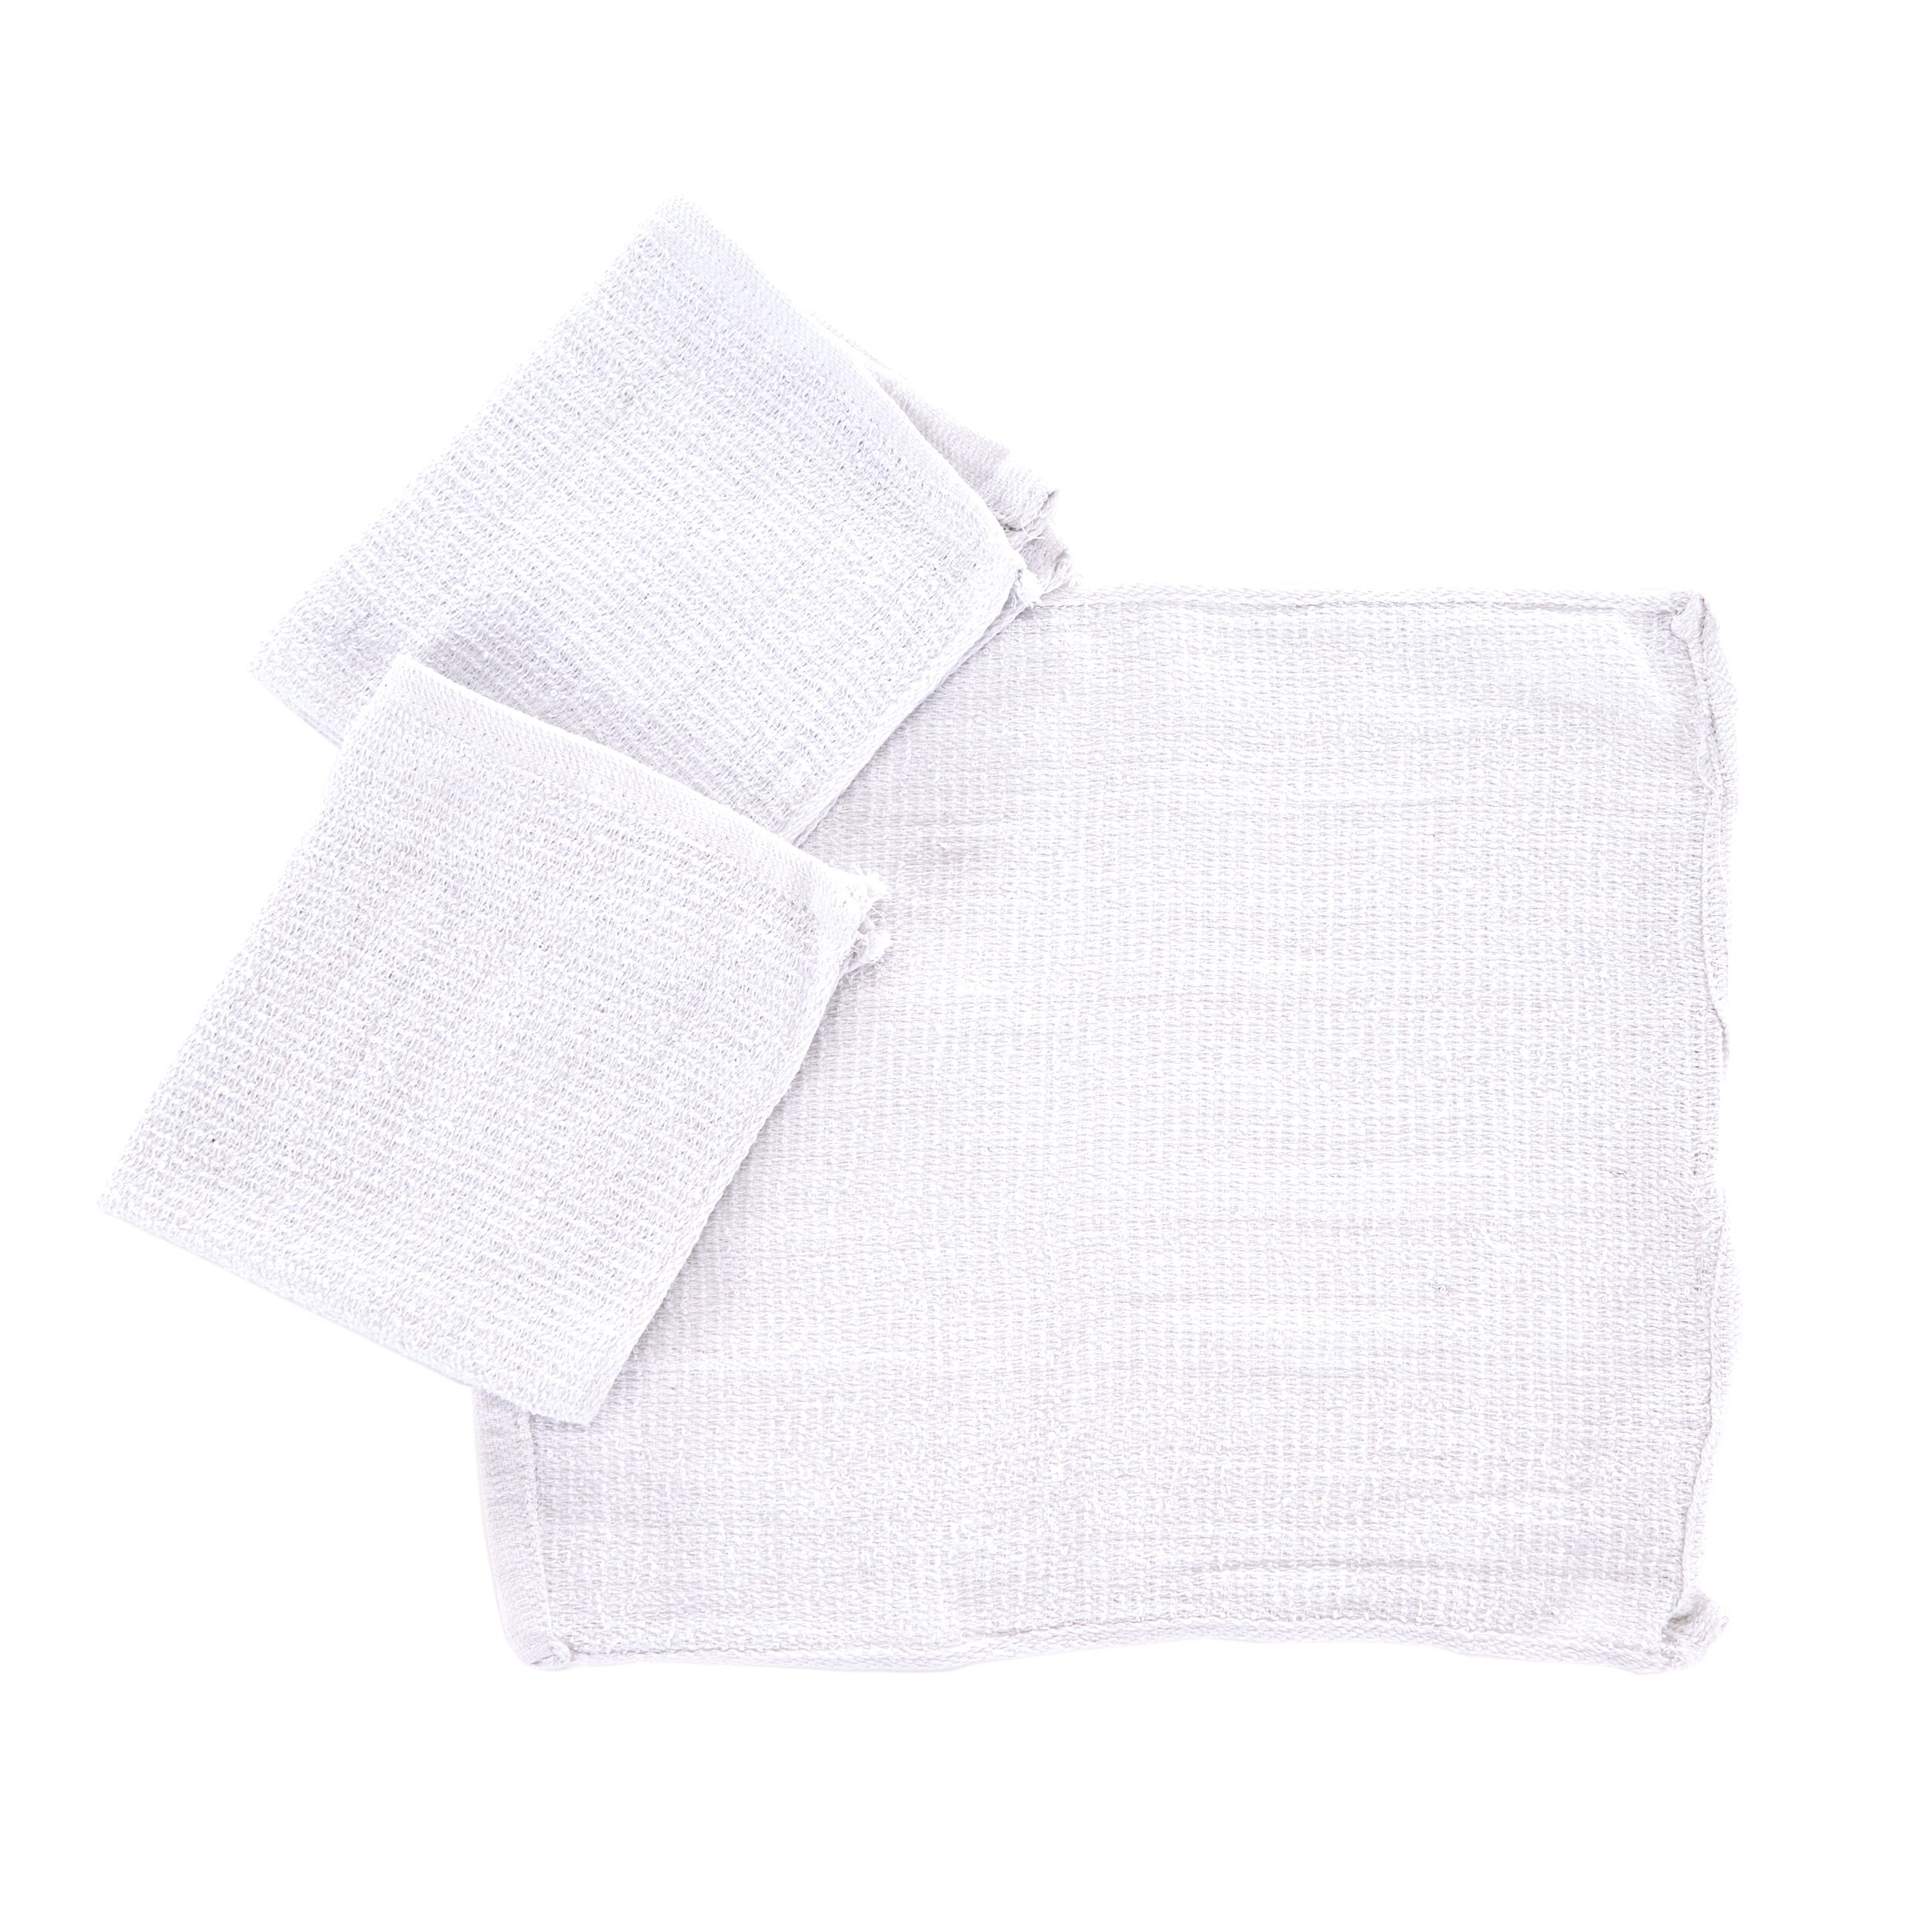 12 Pack XL White Terry Towels (Size: 16 x 27)